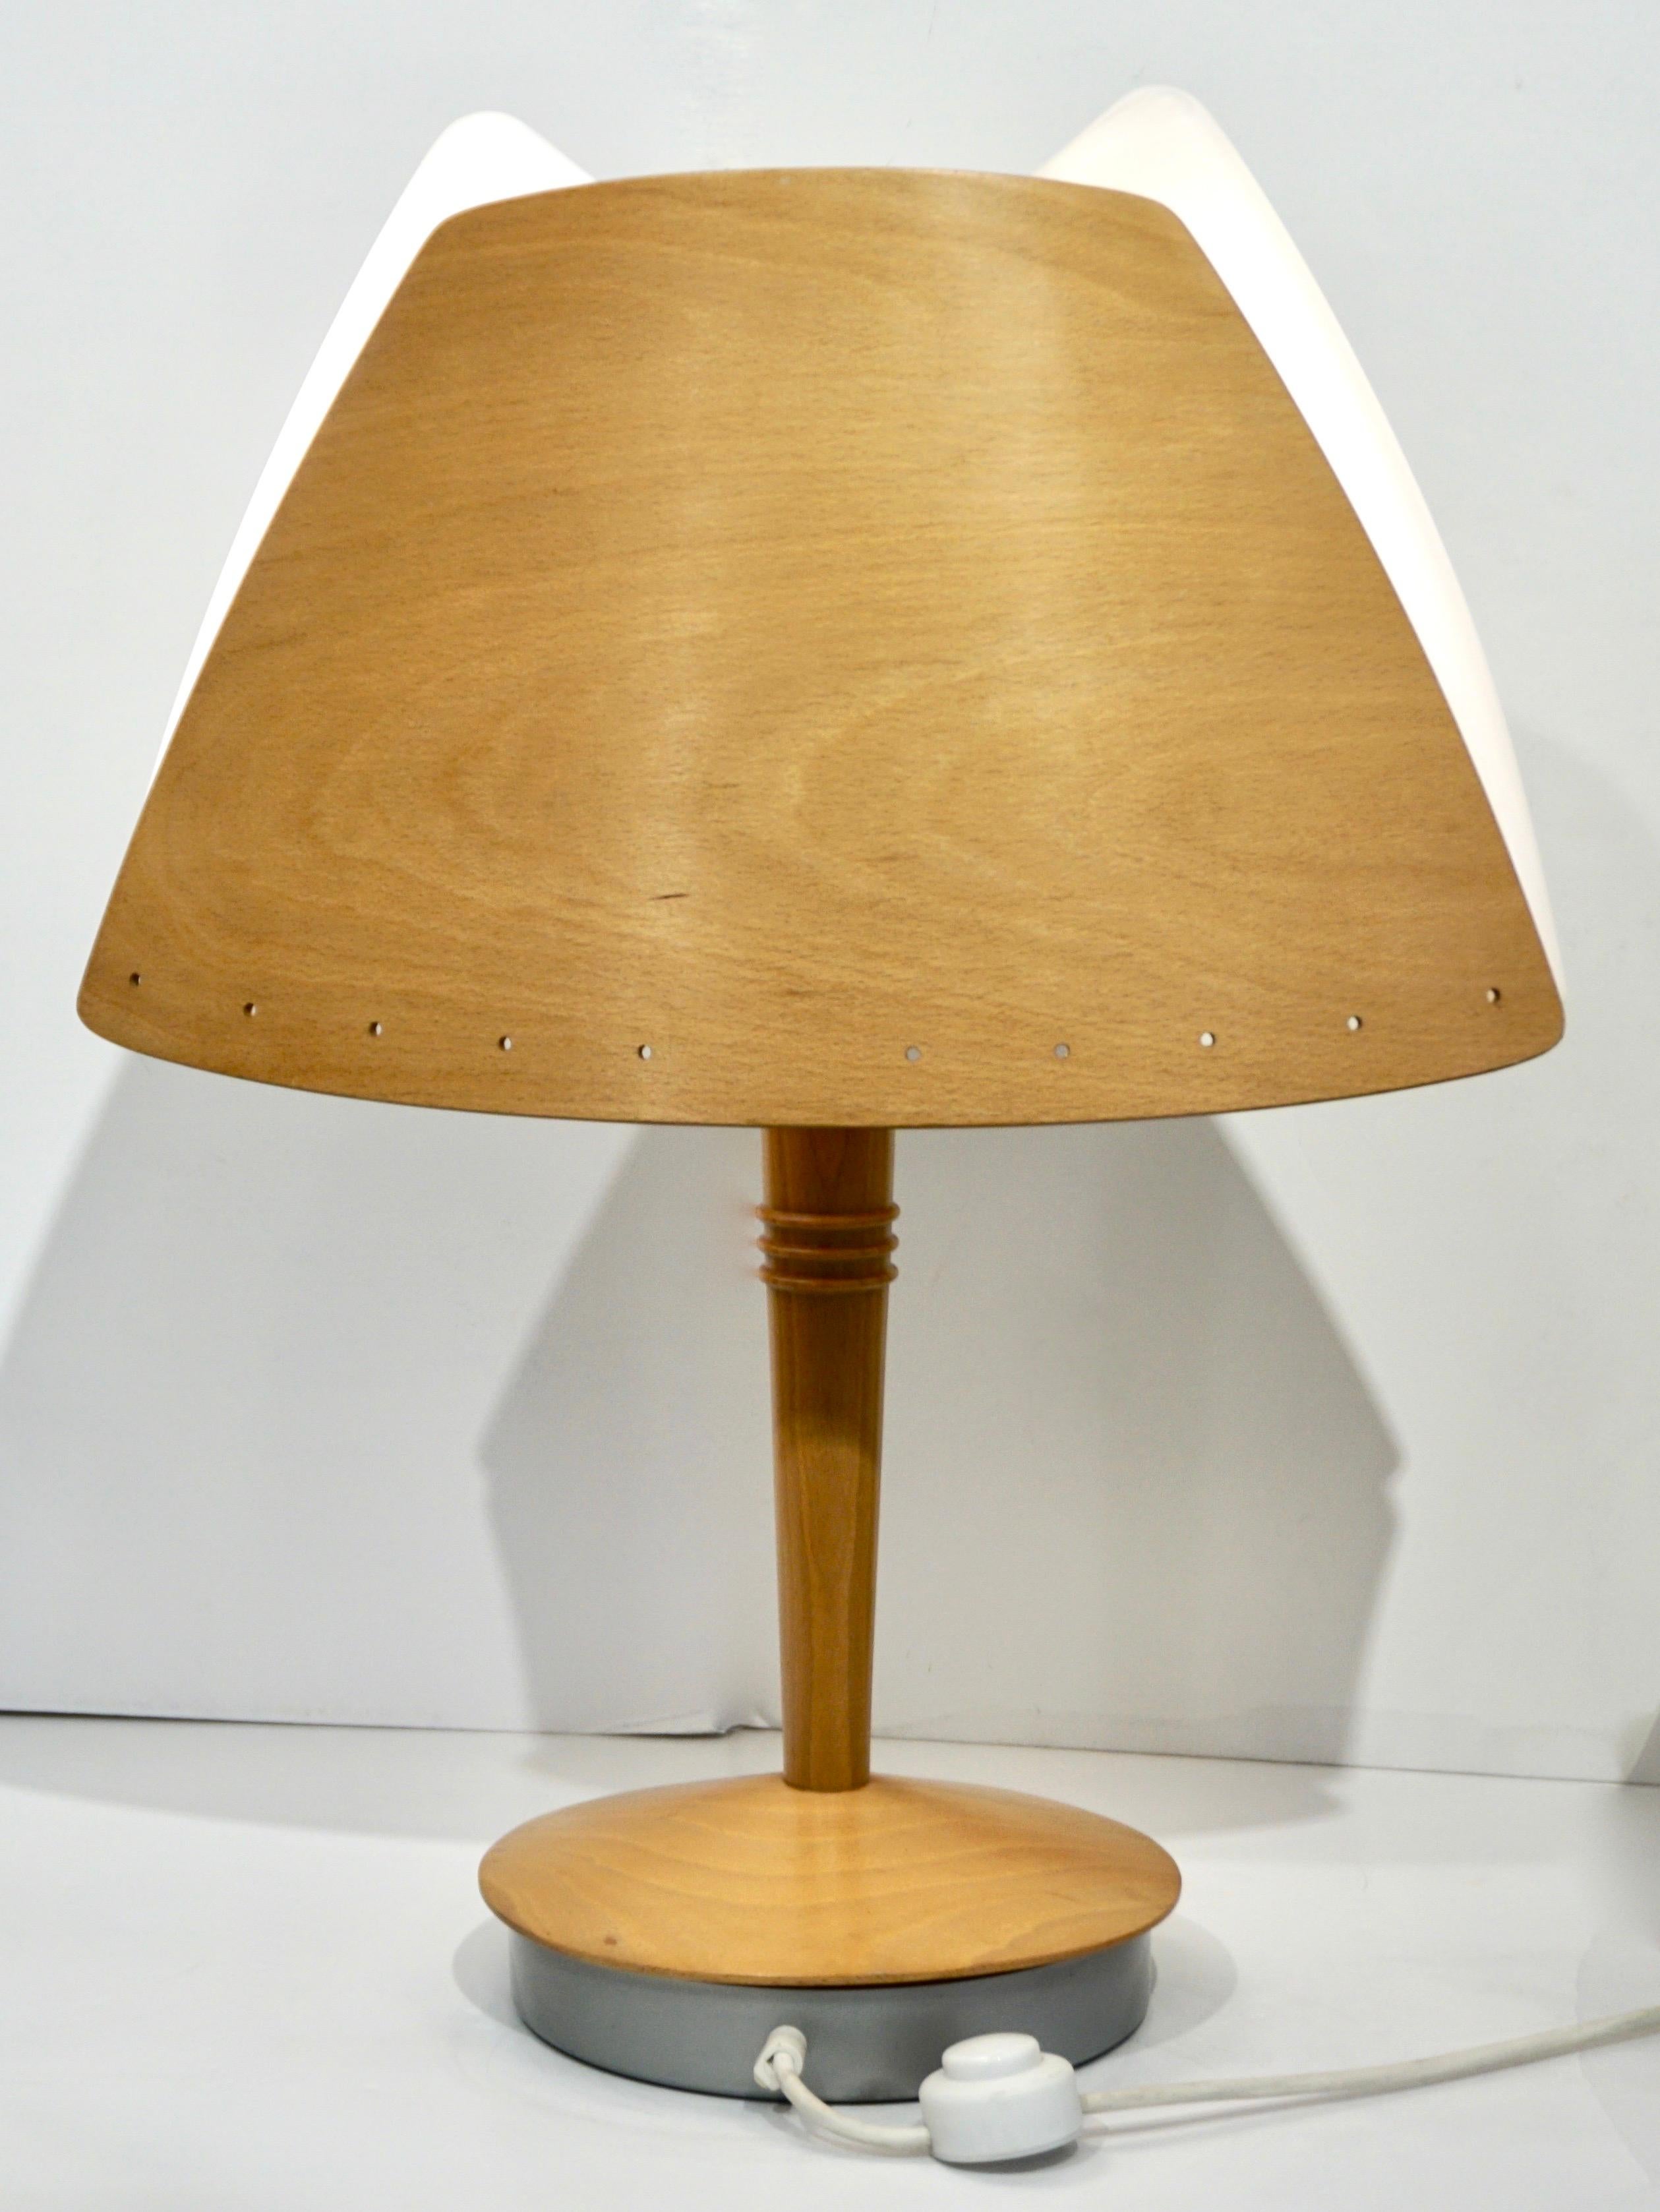 1970 French Pair of Birch Wood and Acrylic Table Lamp for Barcelona Hilton Hotel For Sale 4